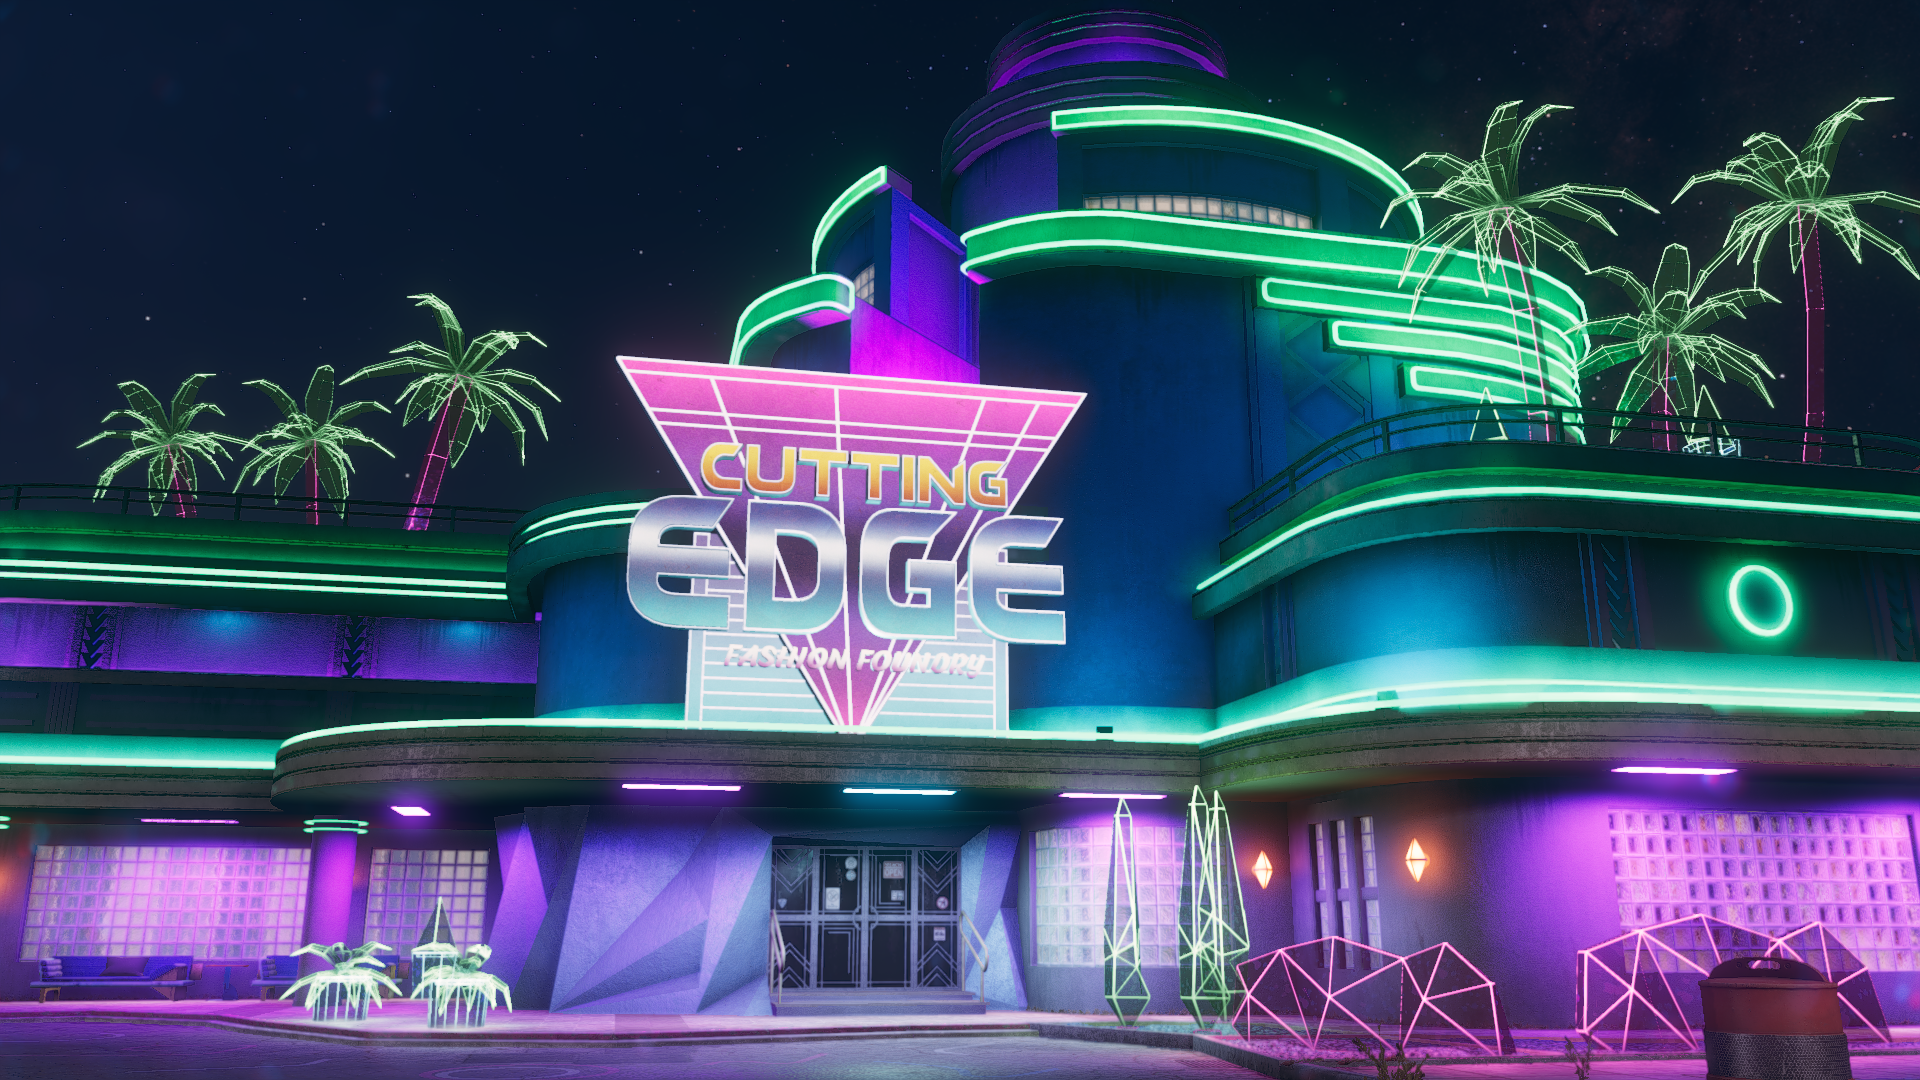 A large neon futuristic building with a sign that says Cutting Edge